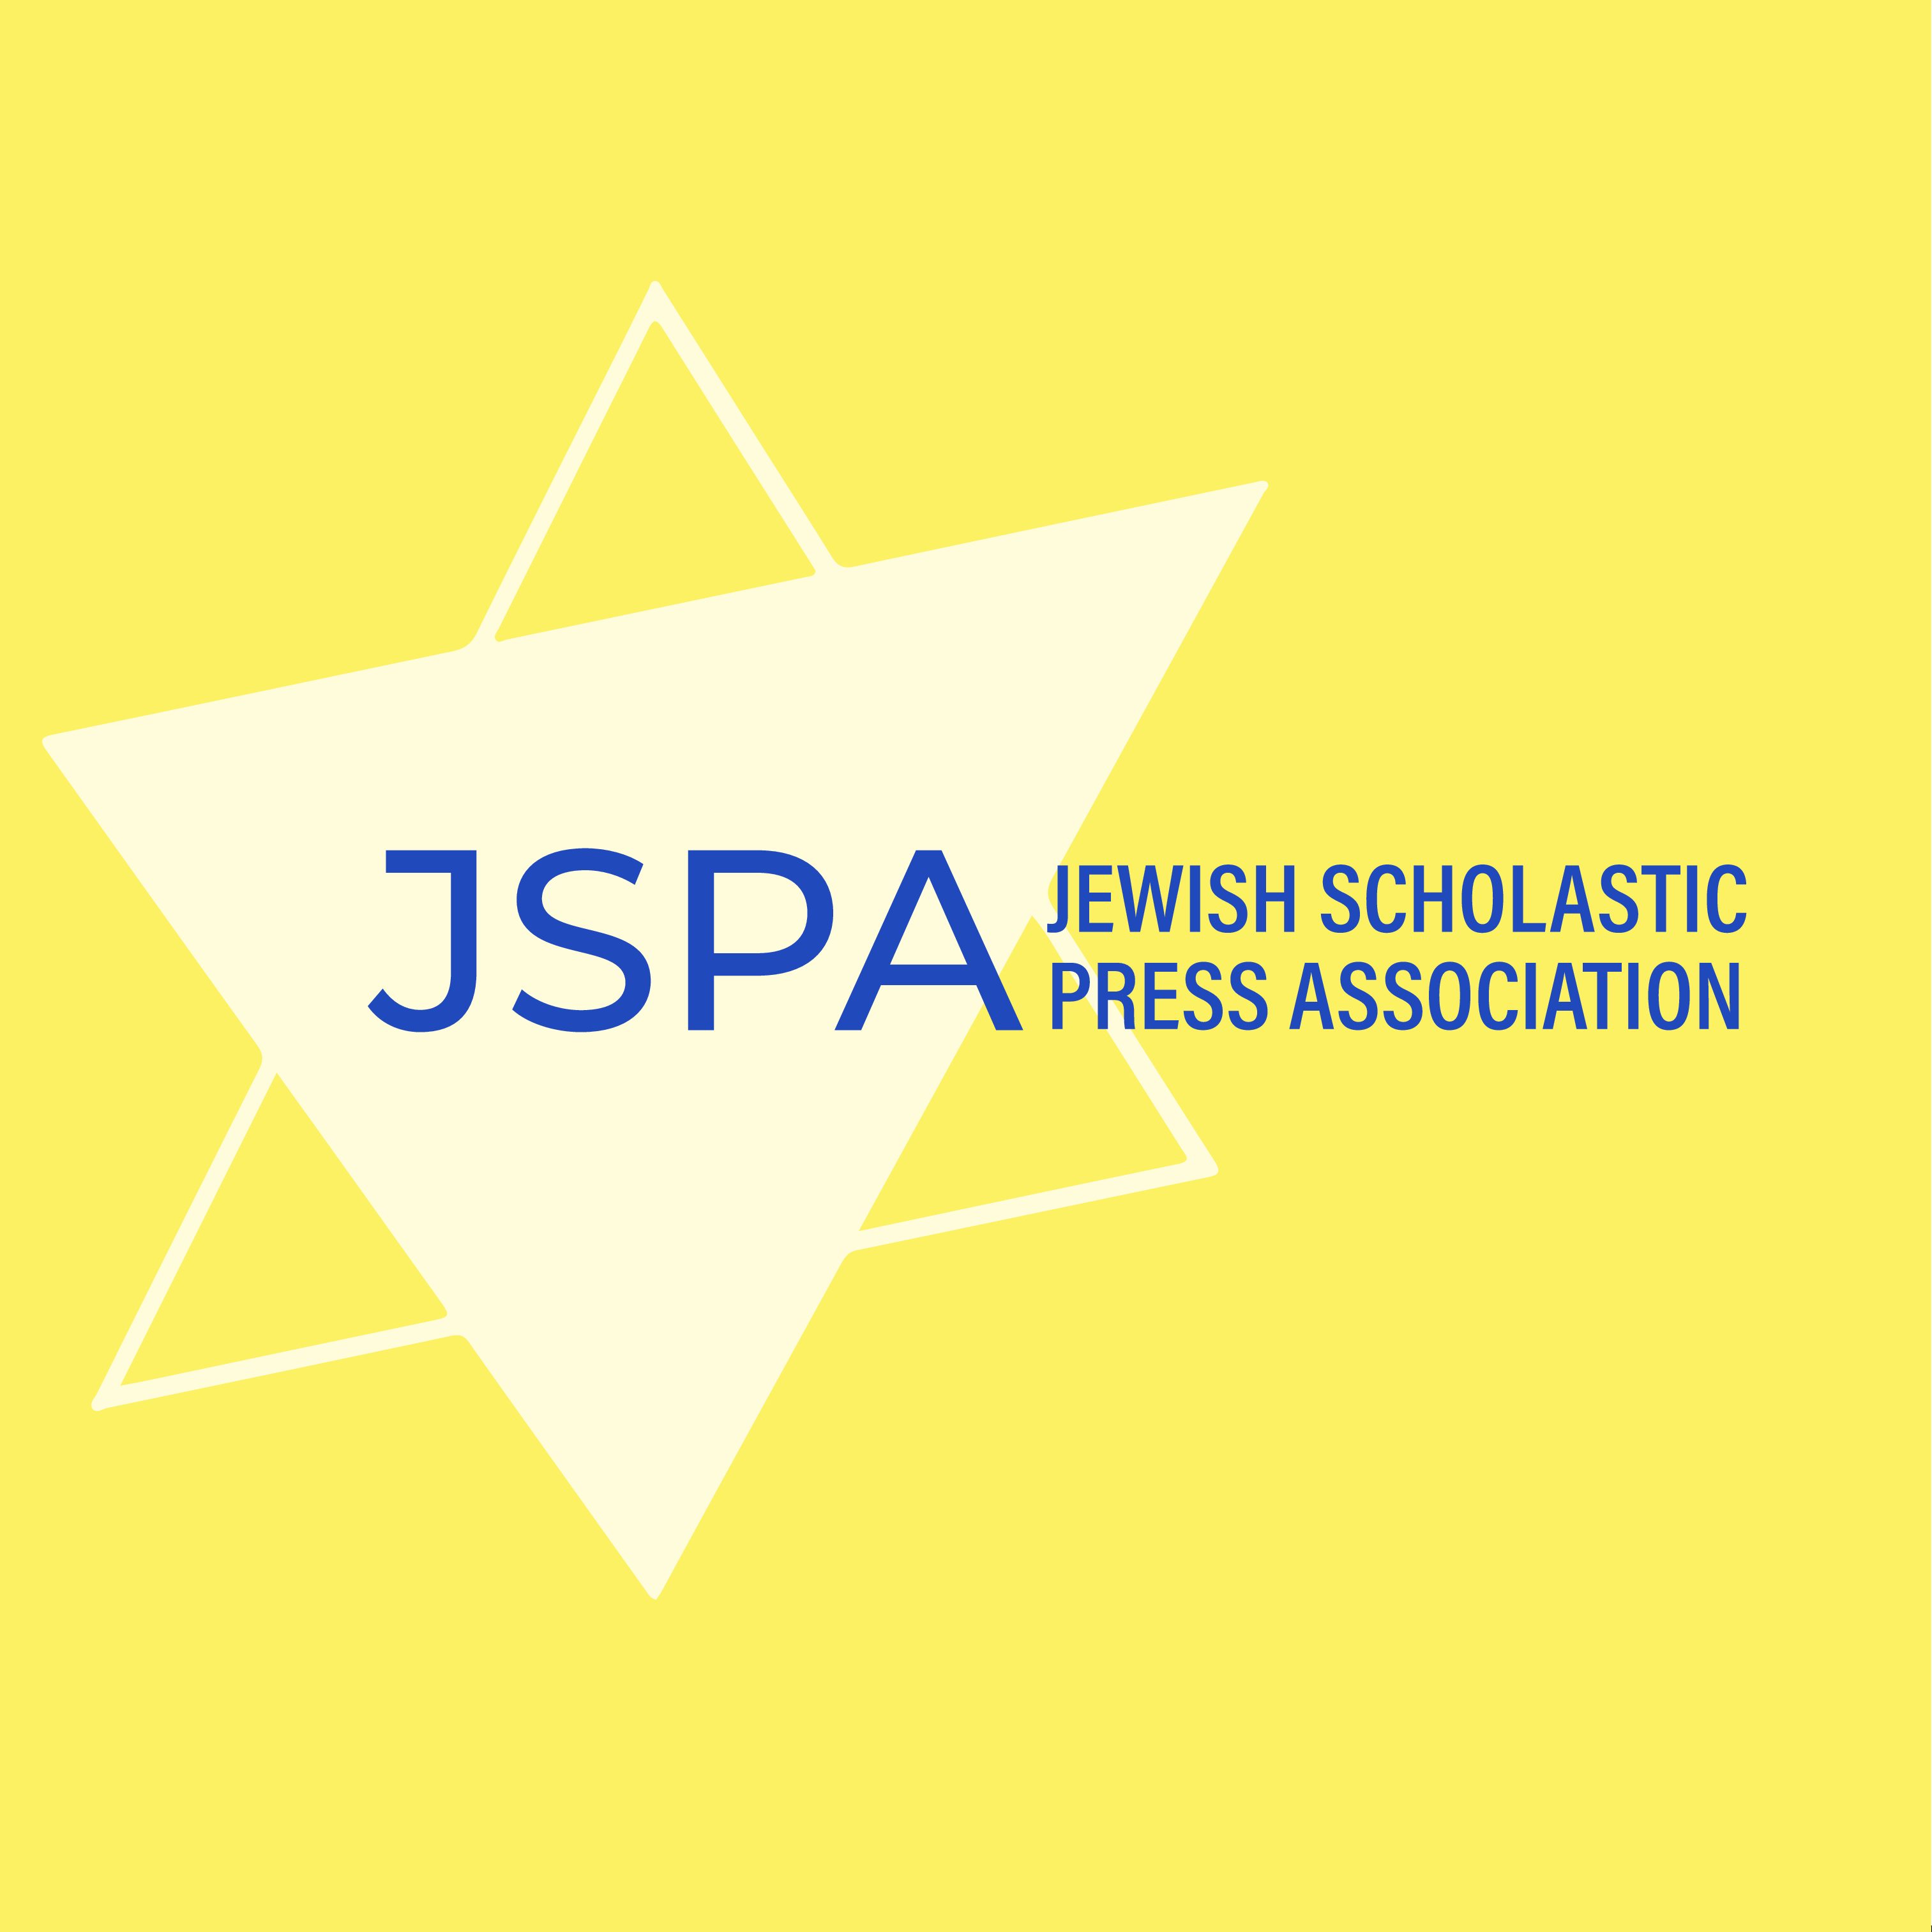 Announcing the 2022 Jewish Scholastic Journalism Conference